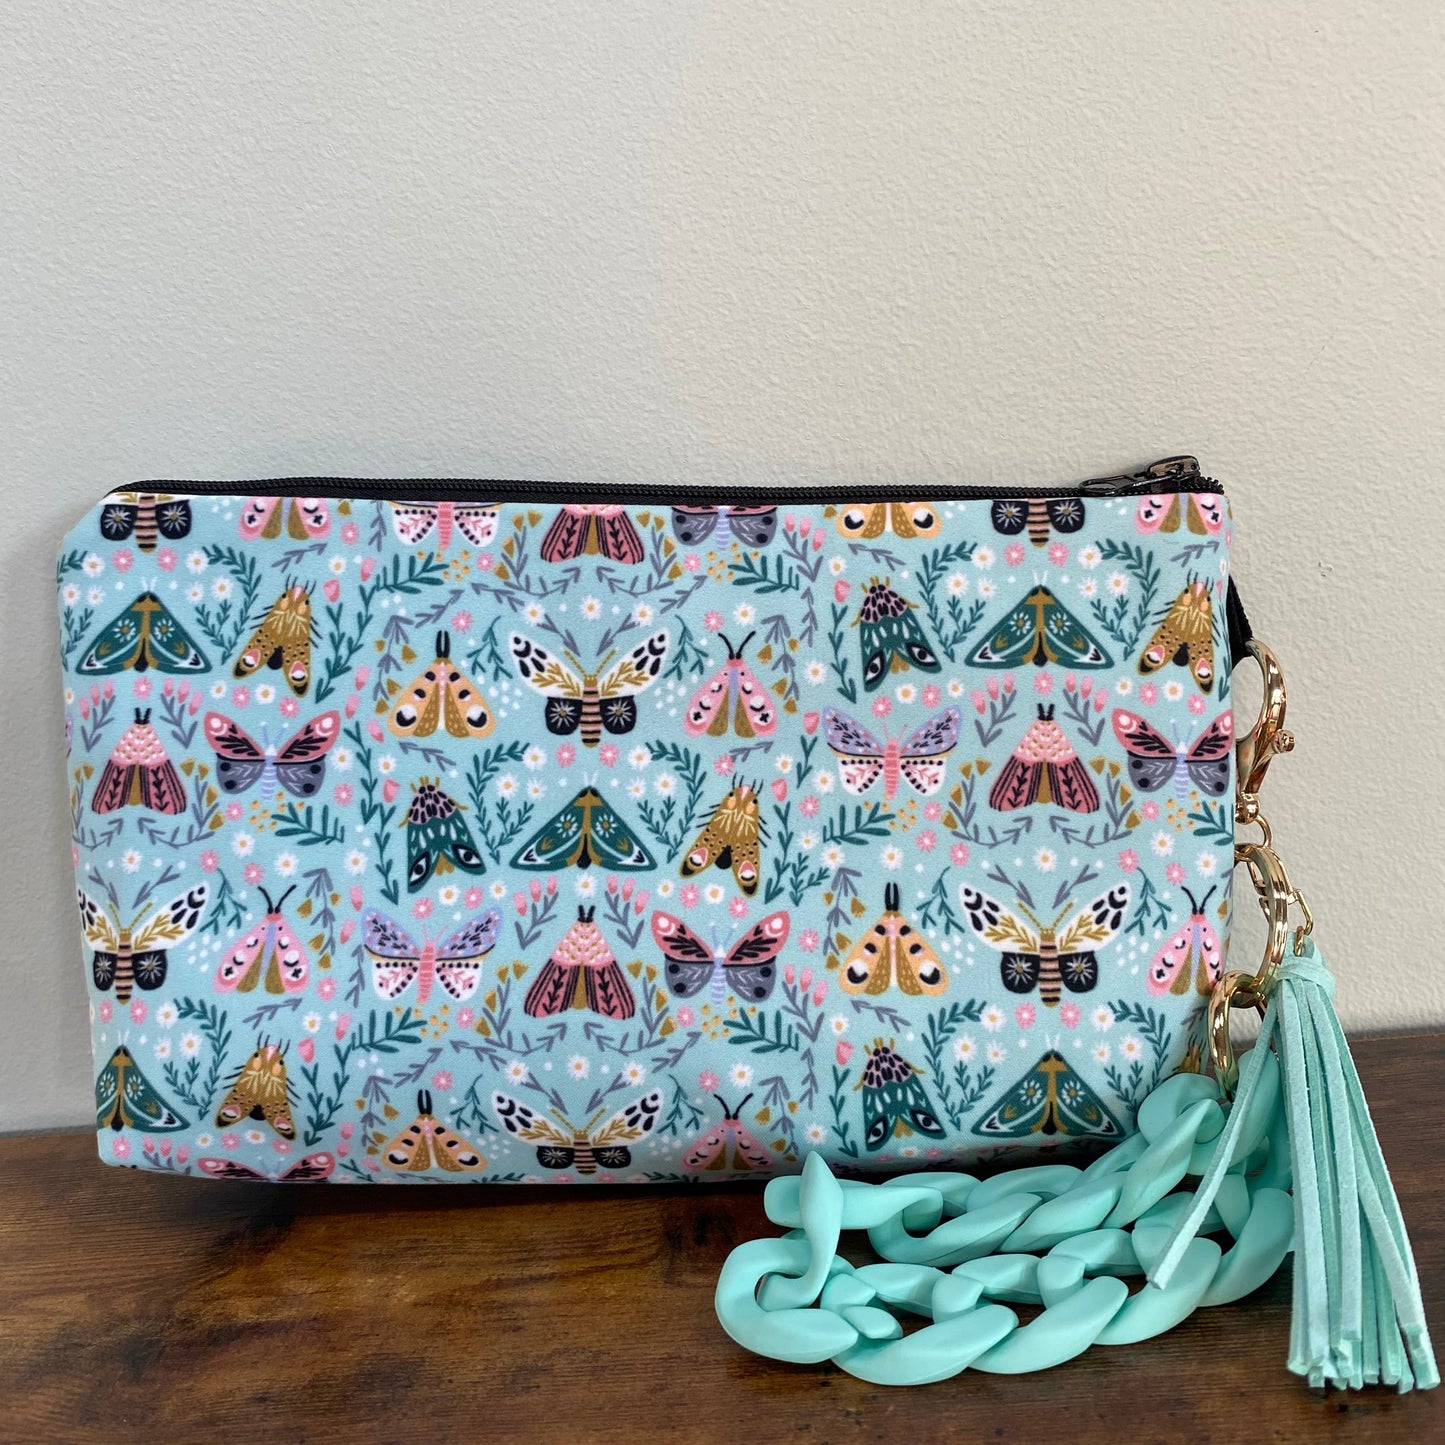 Butterfly & Moth on Mint - Water-Resistant Multi-Use Pouch